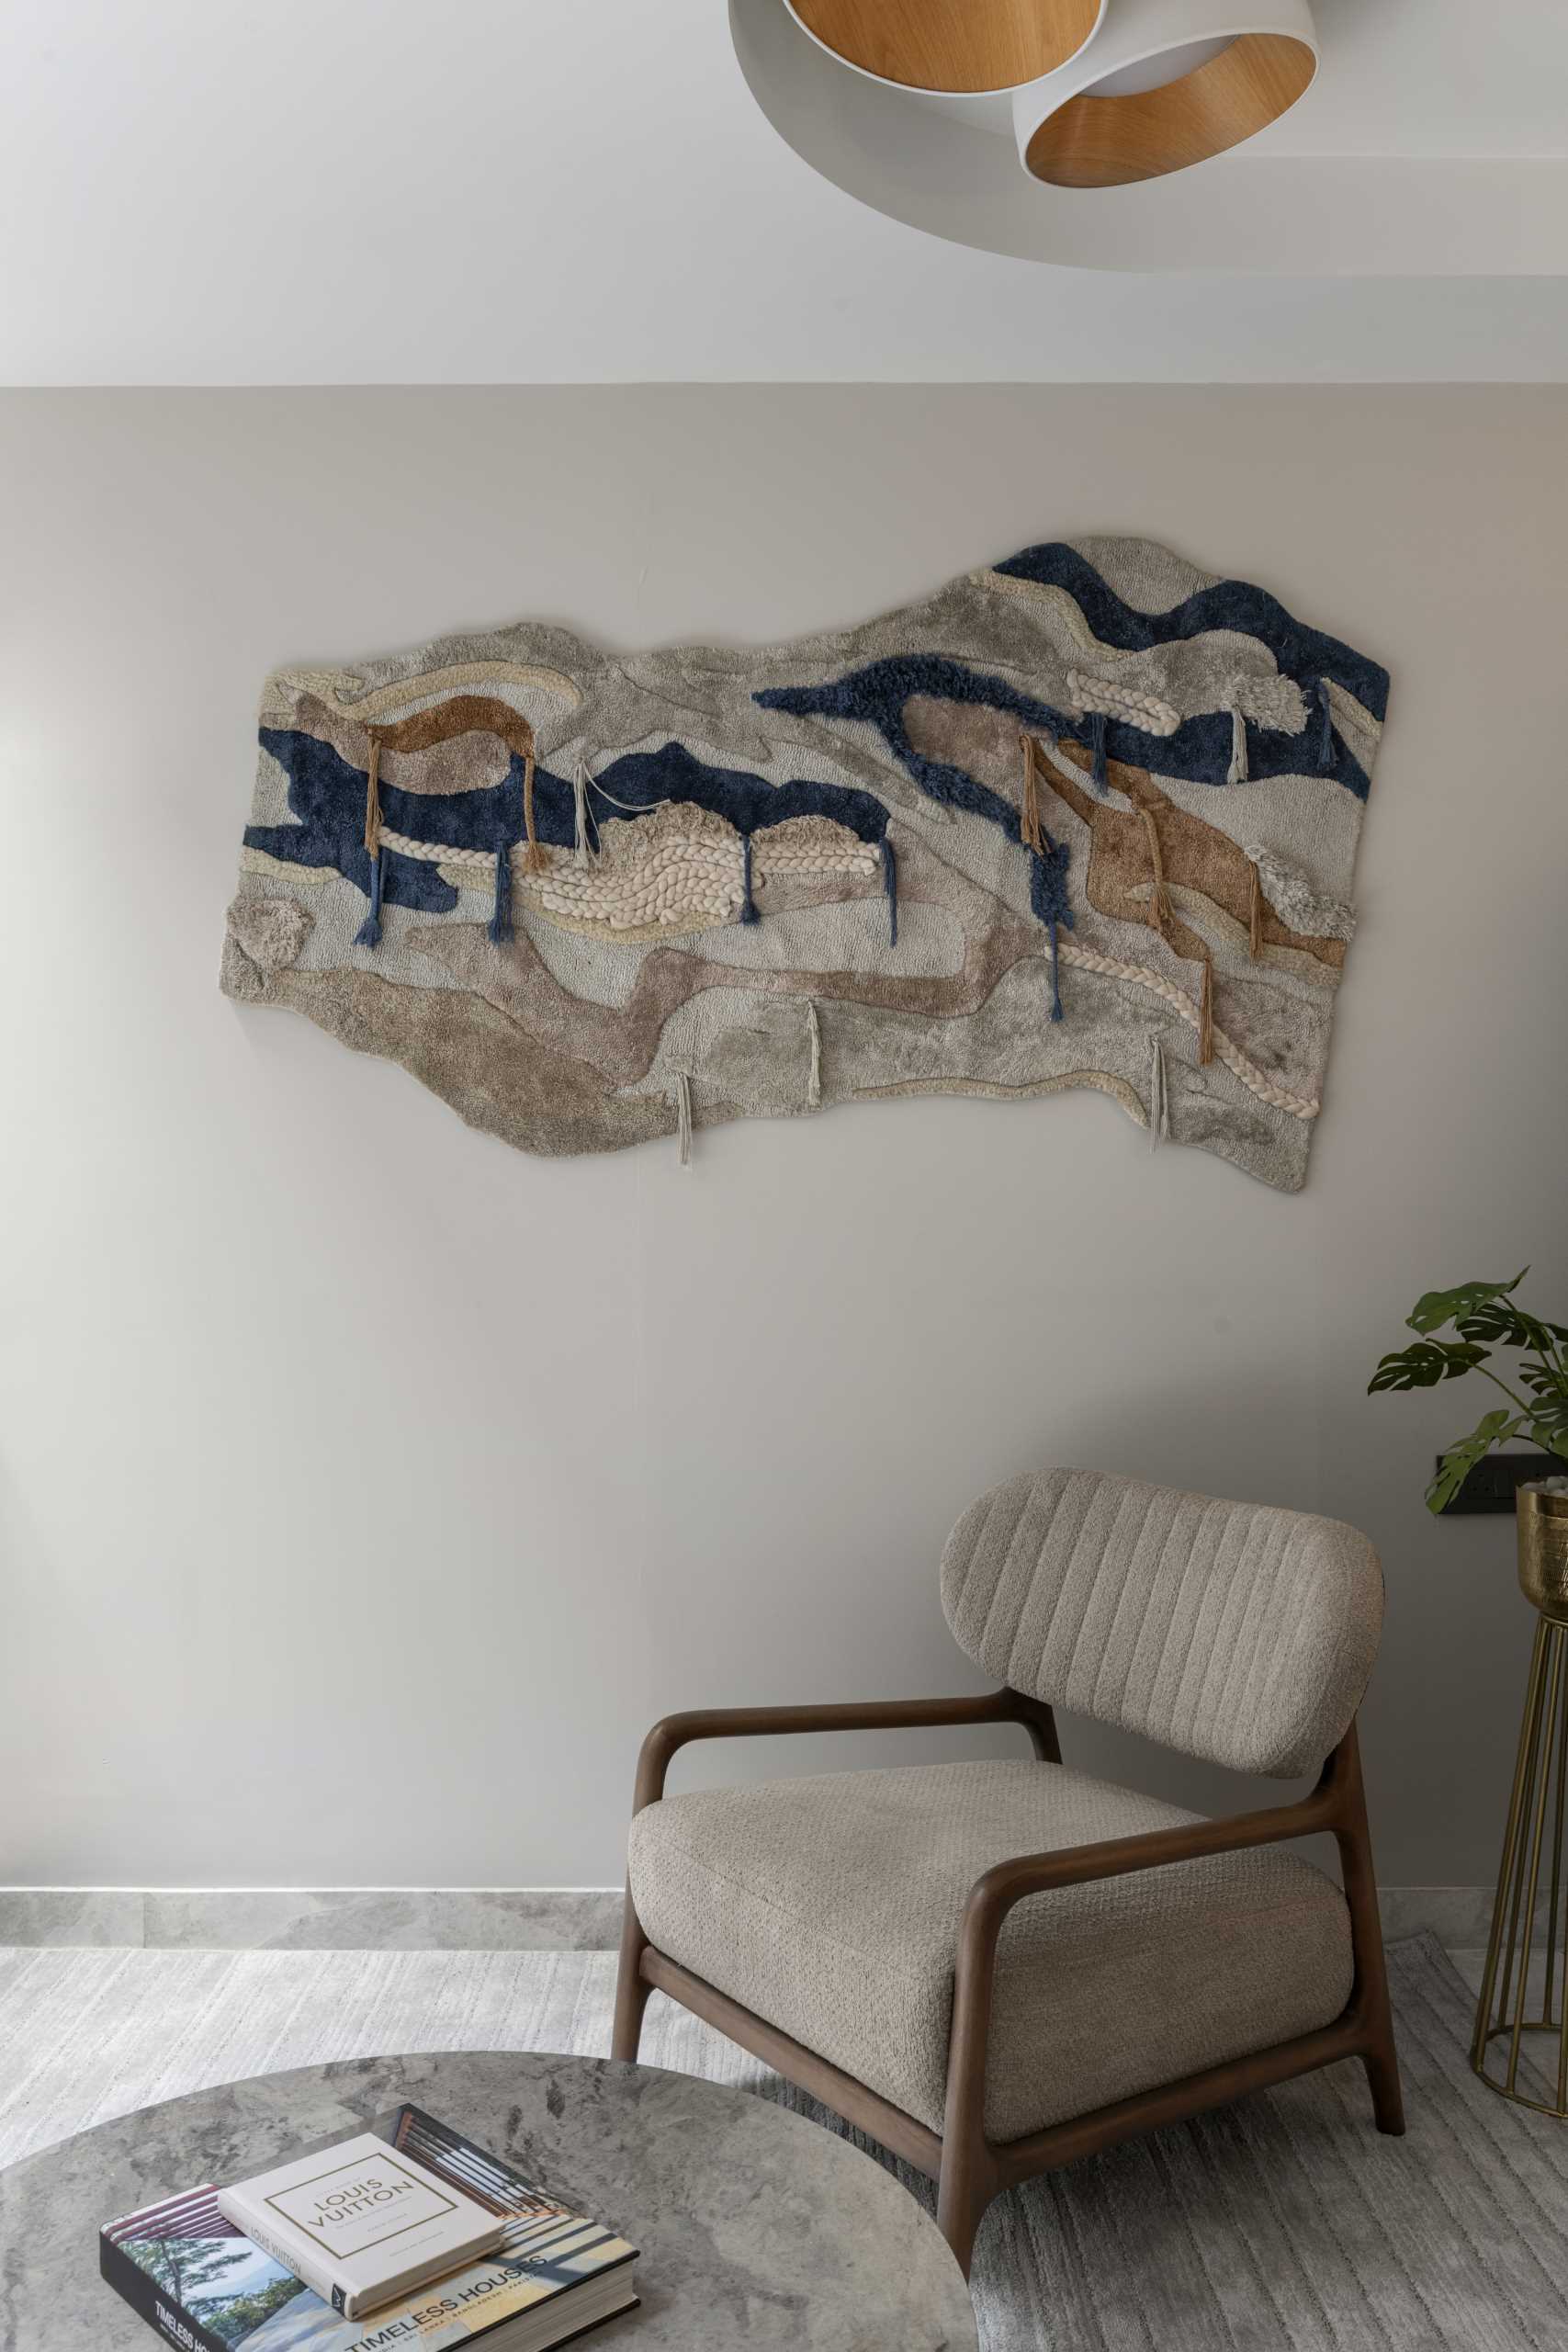 A contemporary sitting area with a textural piece of wall art.